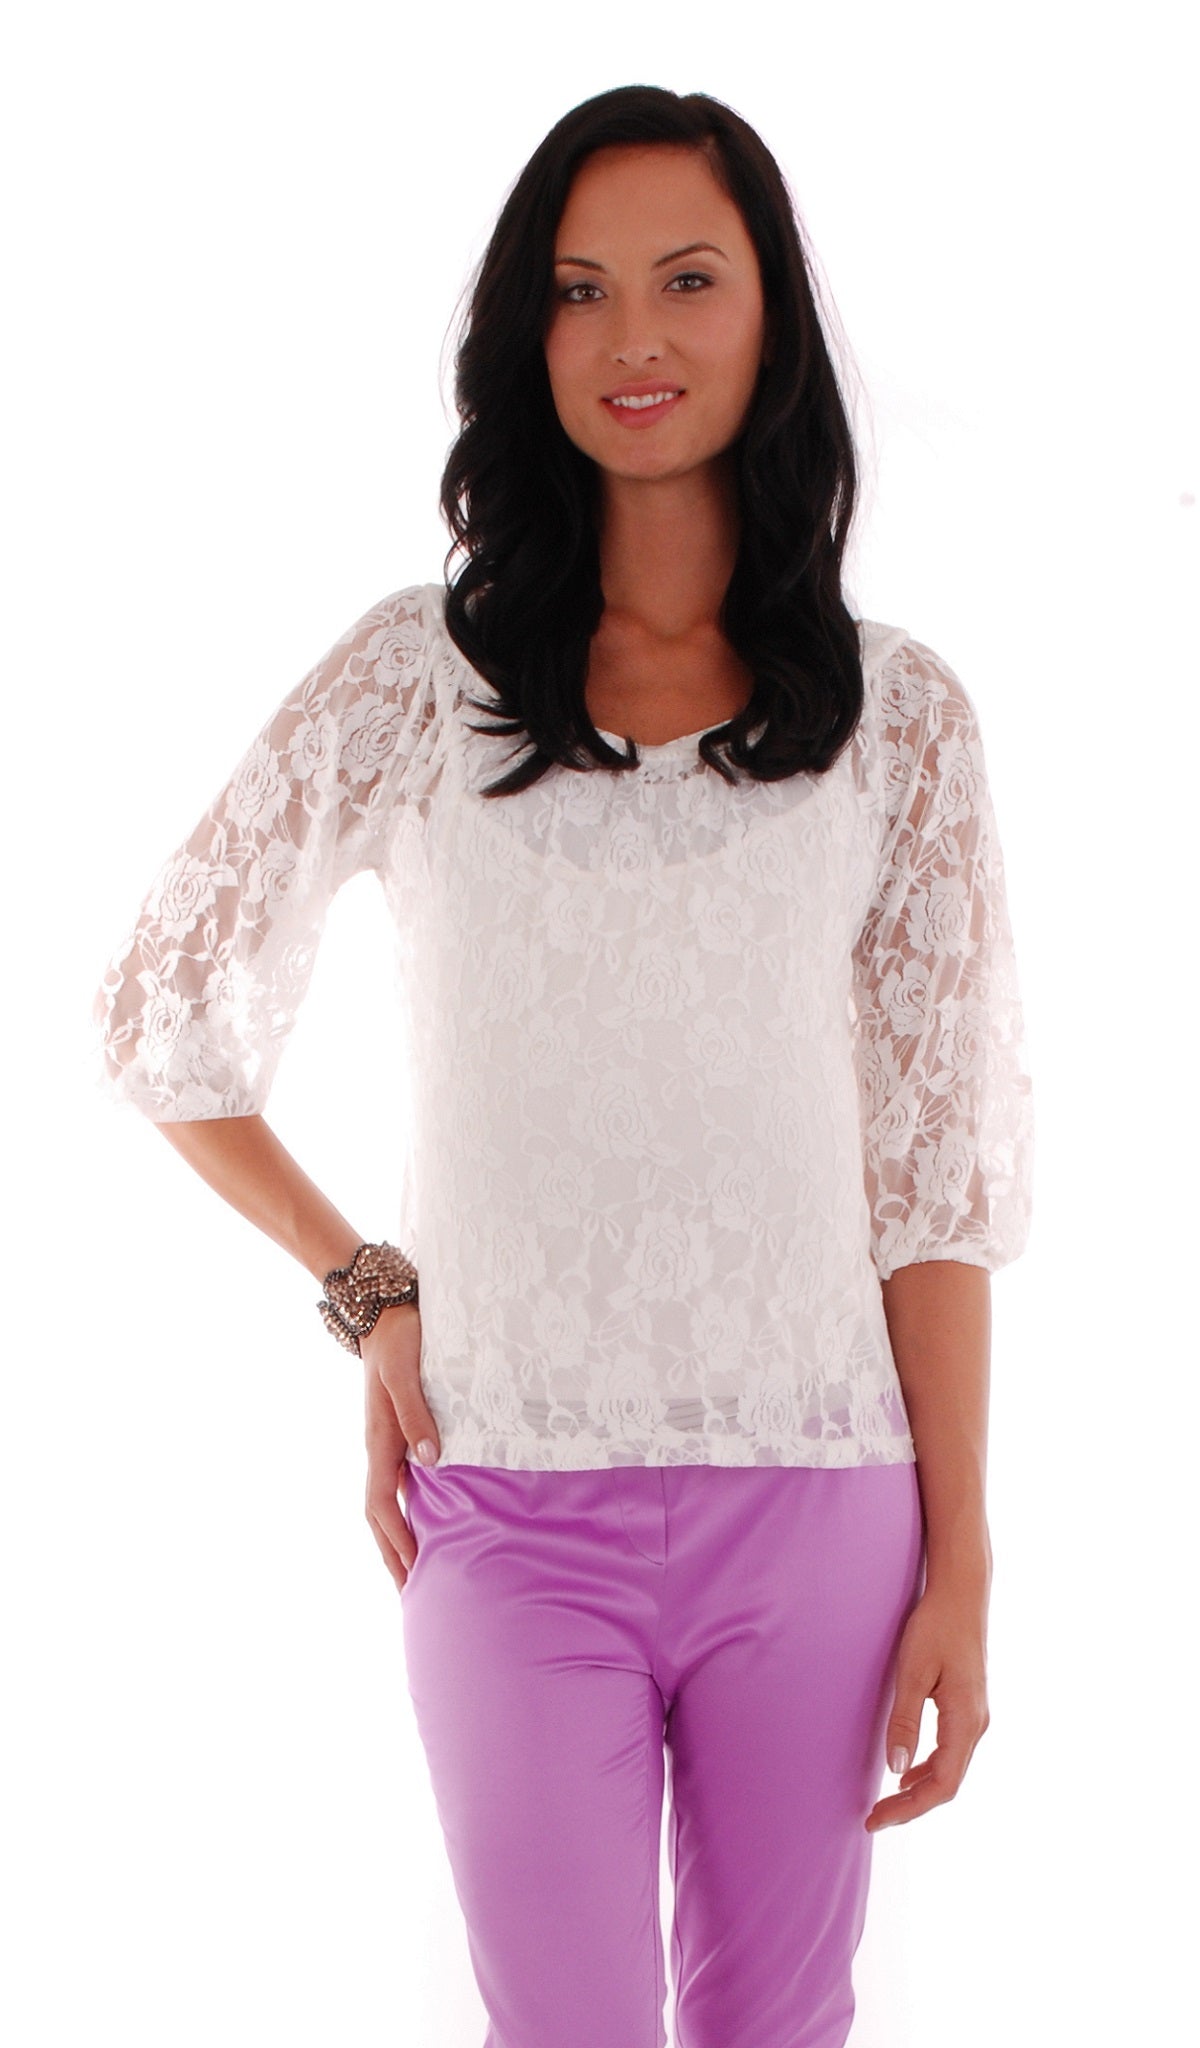 Ivory Drew lace top worn by pregnant woman with lavender pants.